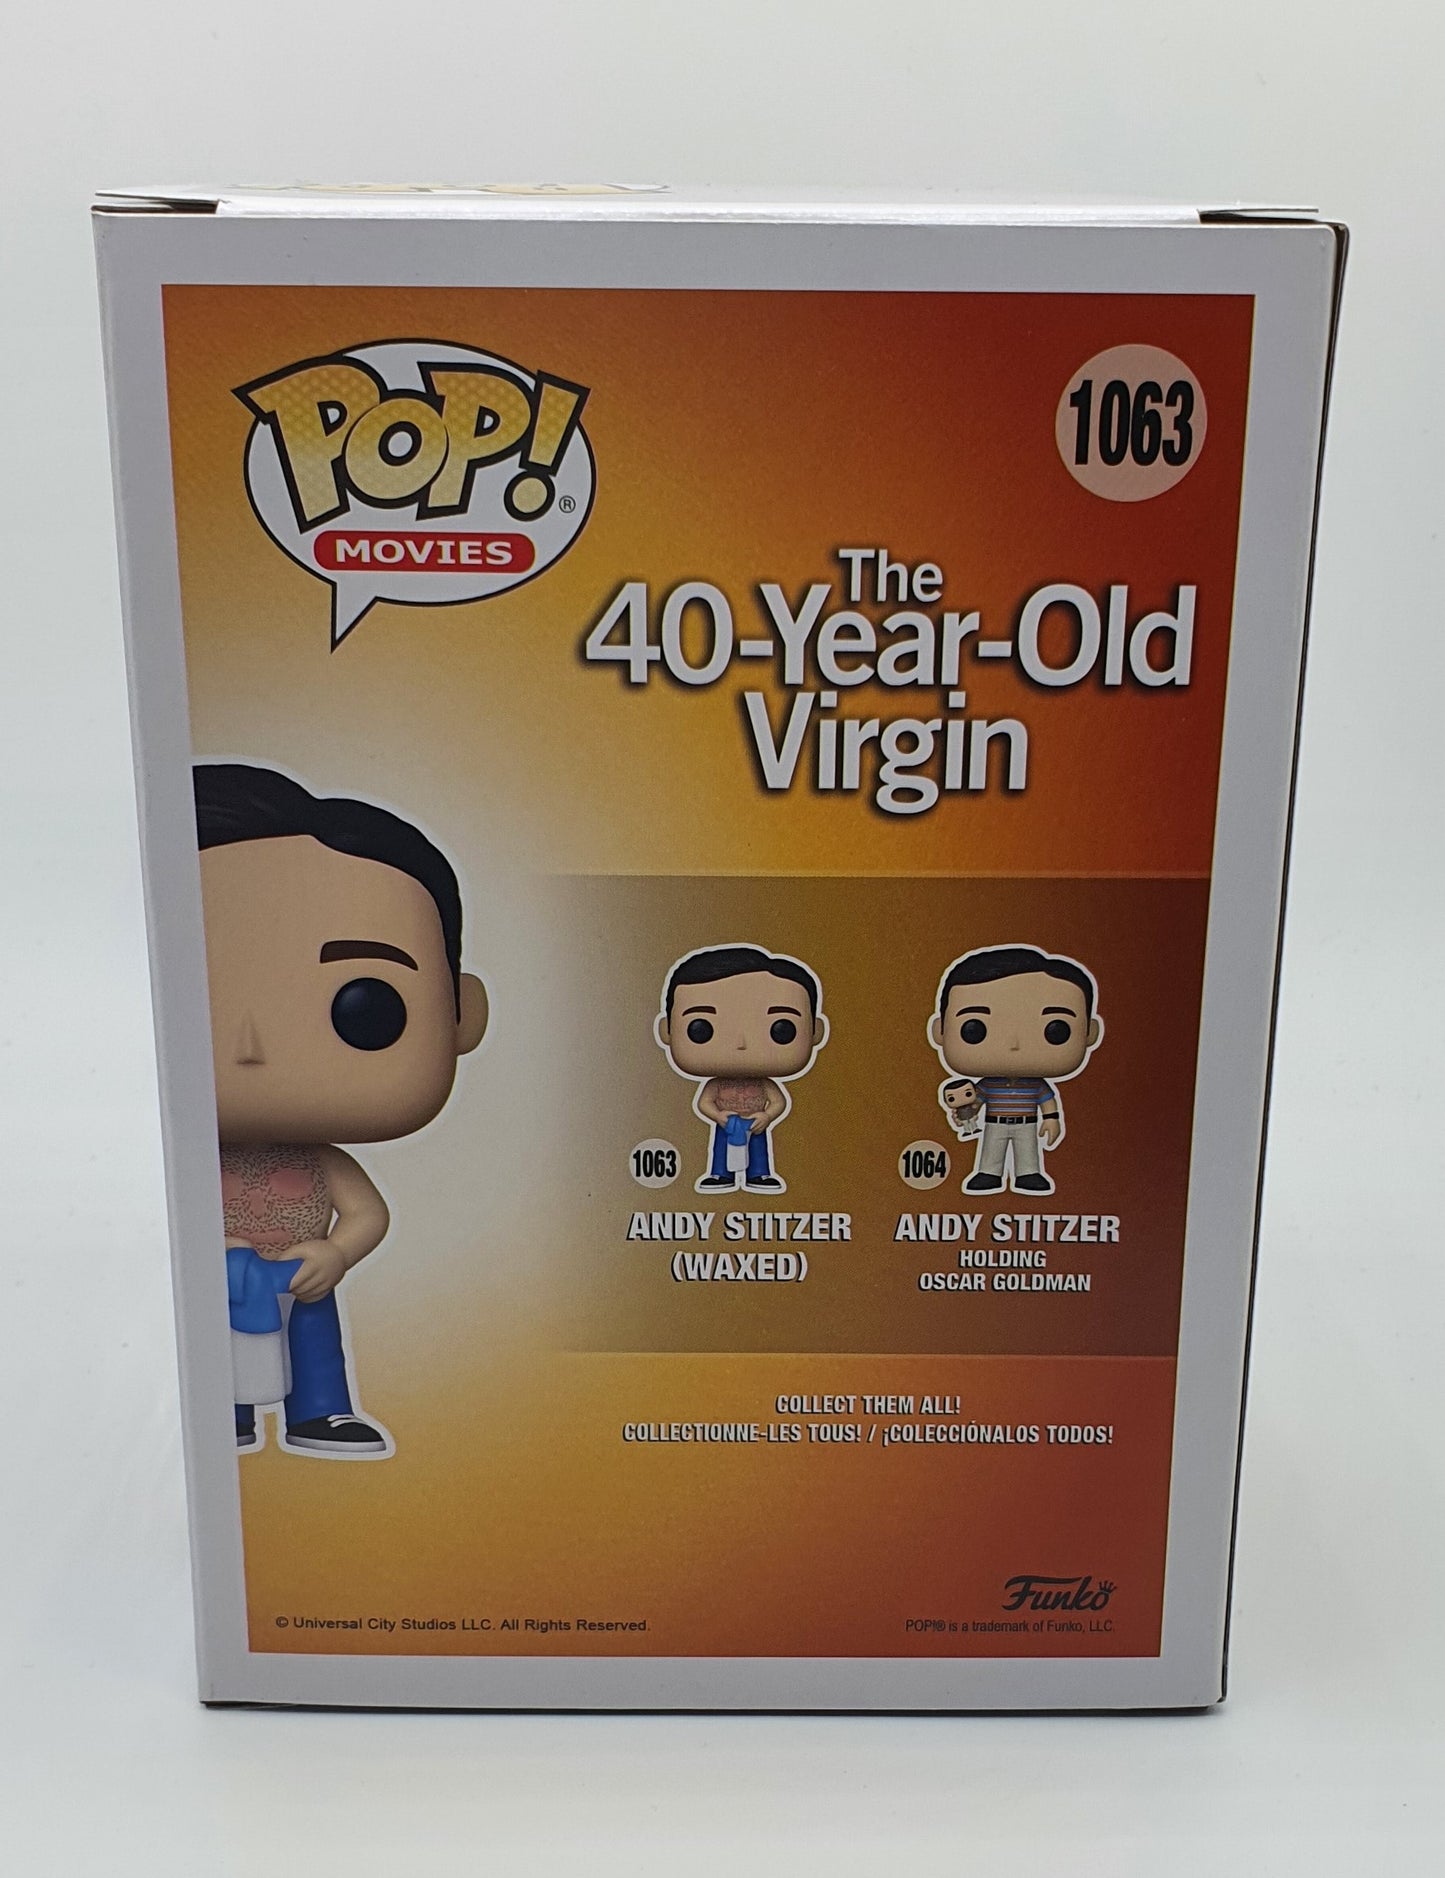 1063 - MOVIES - 40 YEAR OLD VIRGIN - ANDY STITZER WAXED